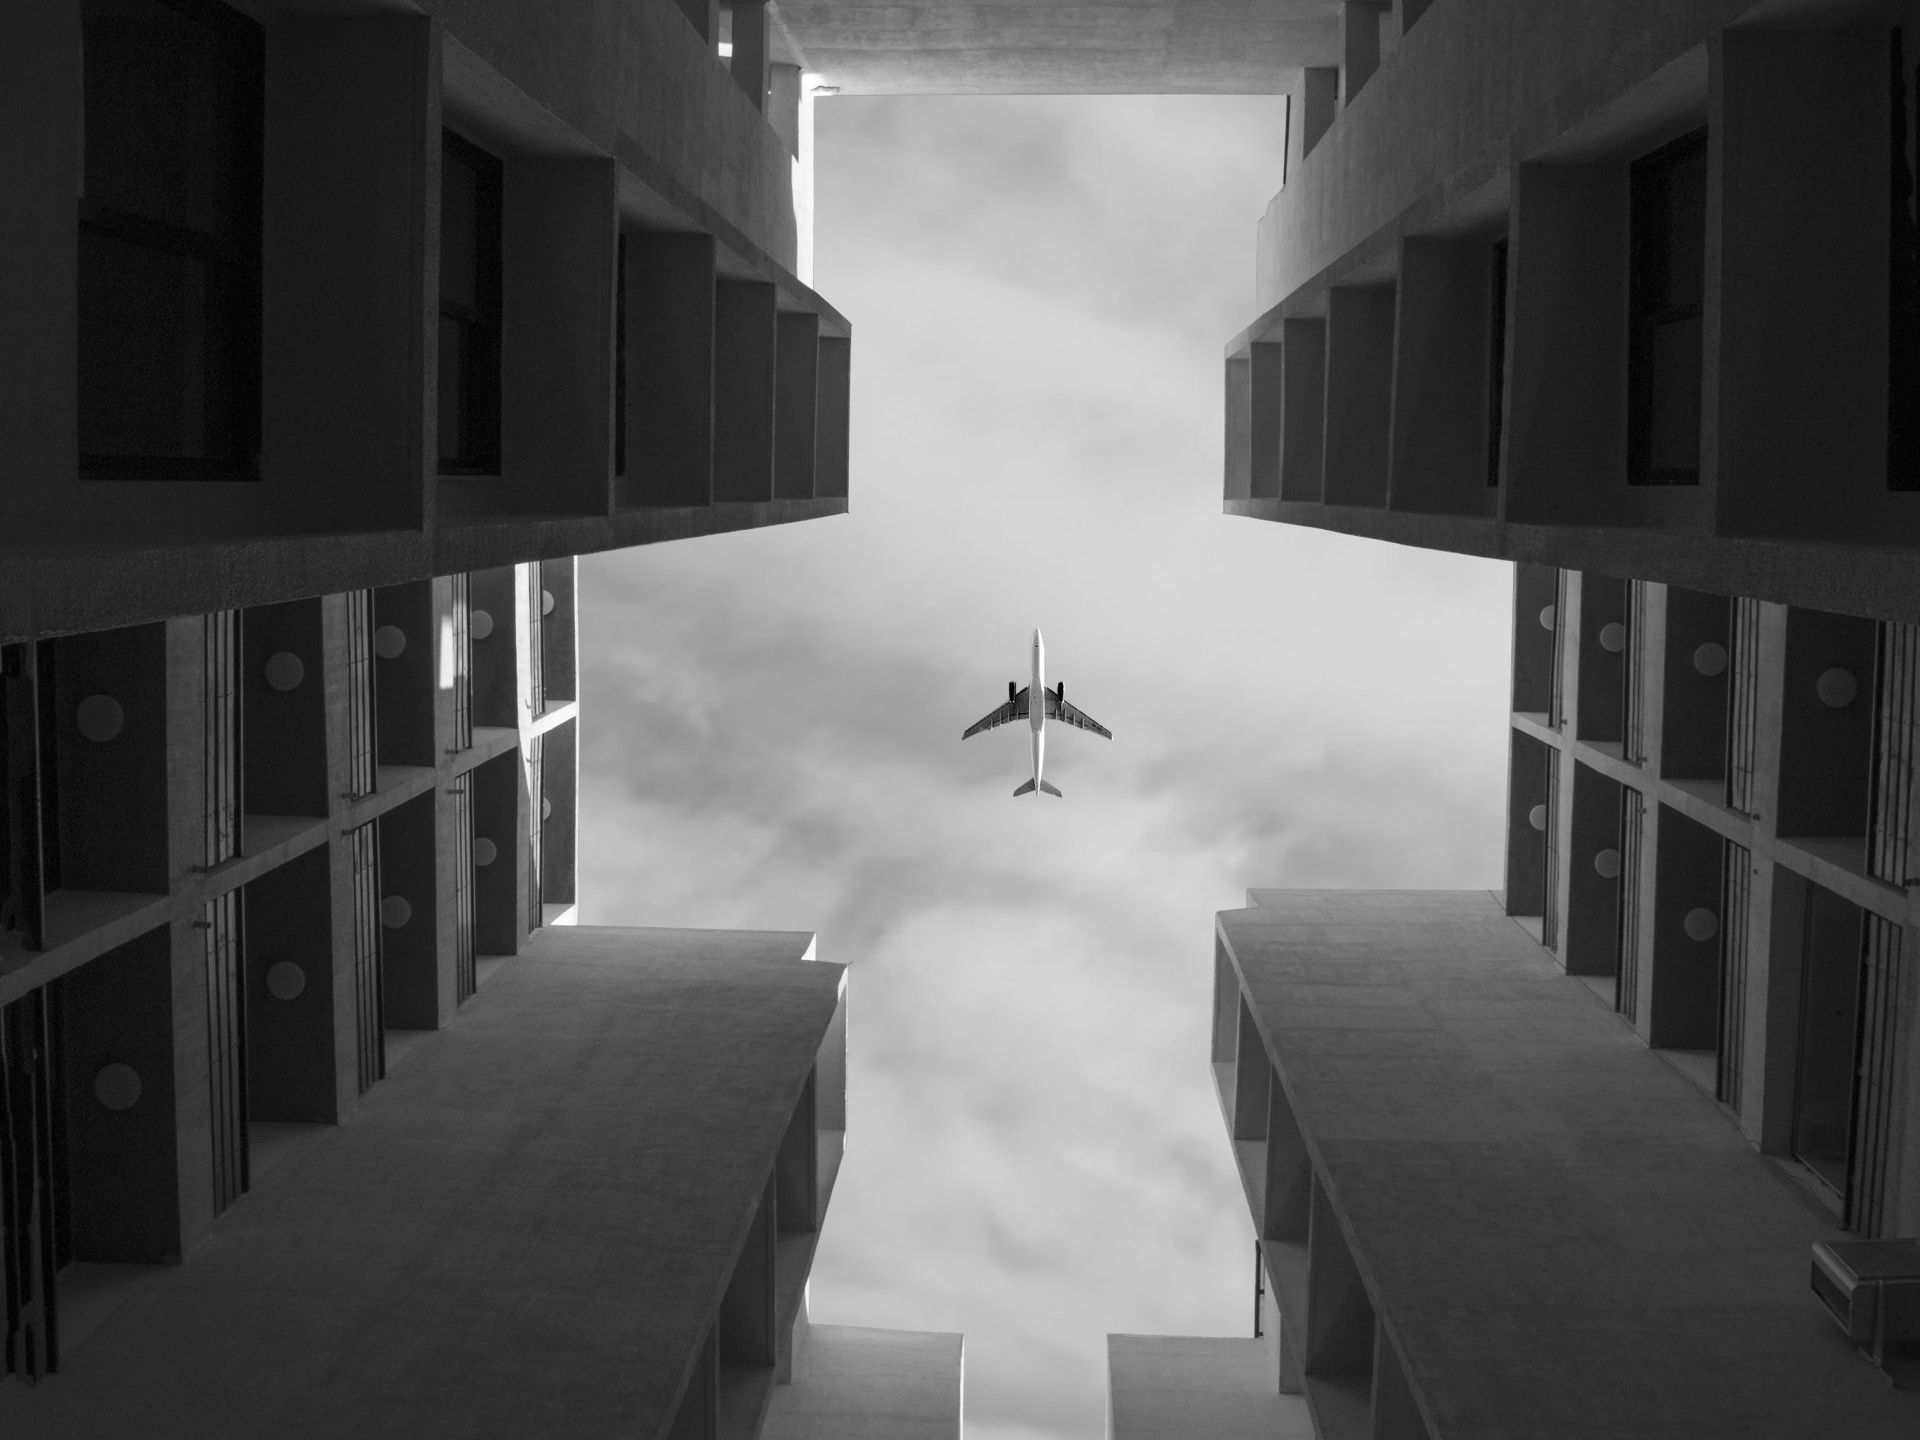 a plane is flying through the air between two buildings